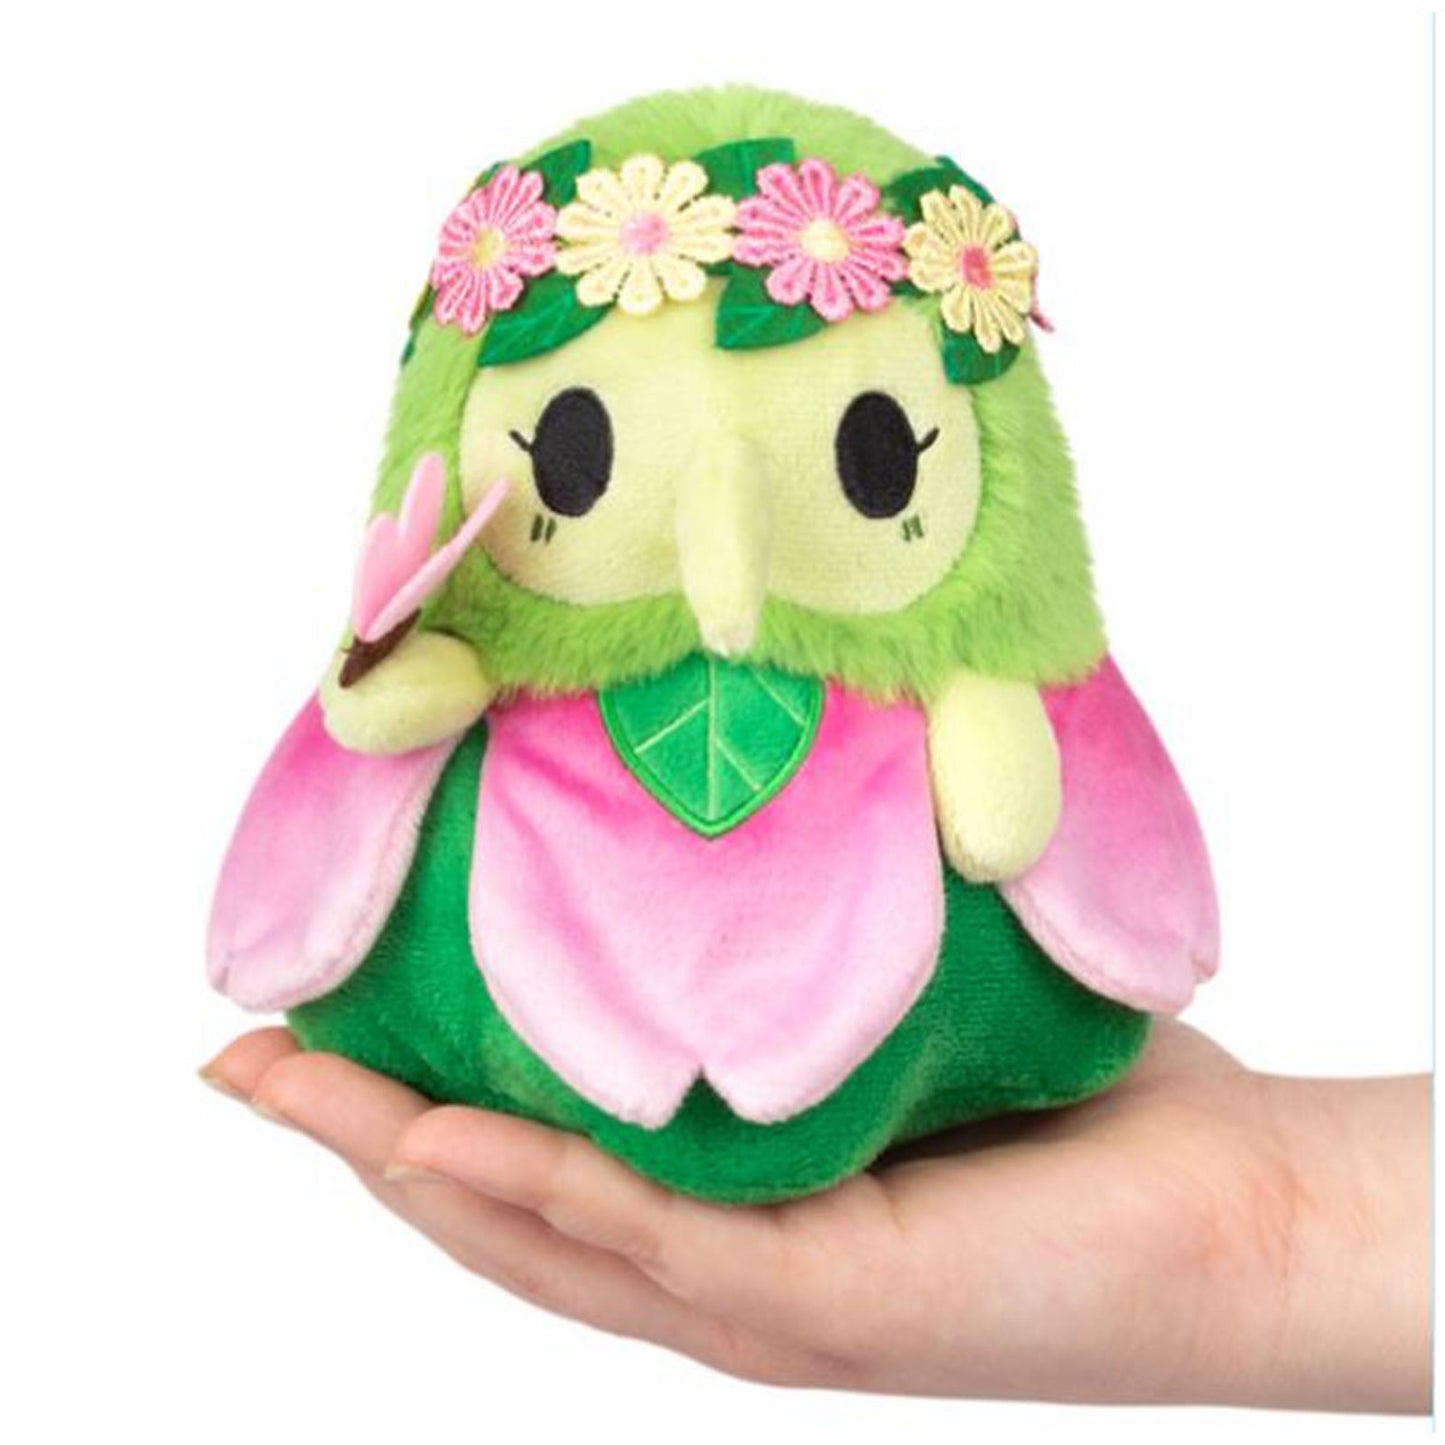 Squishable Alter Ego Plague Doctor Nymph 6 Inch Plush